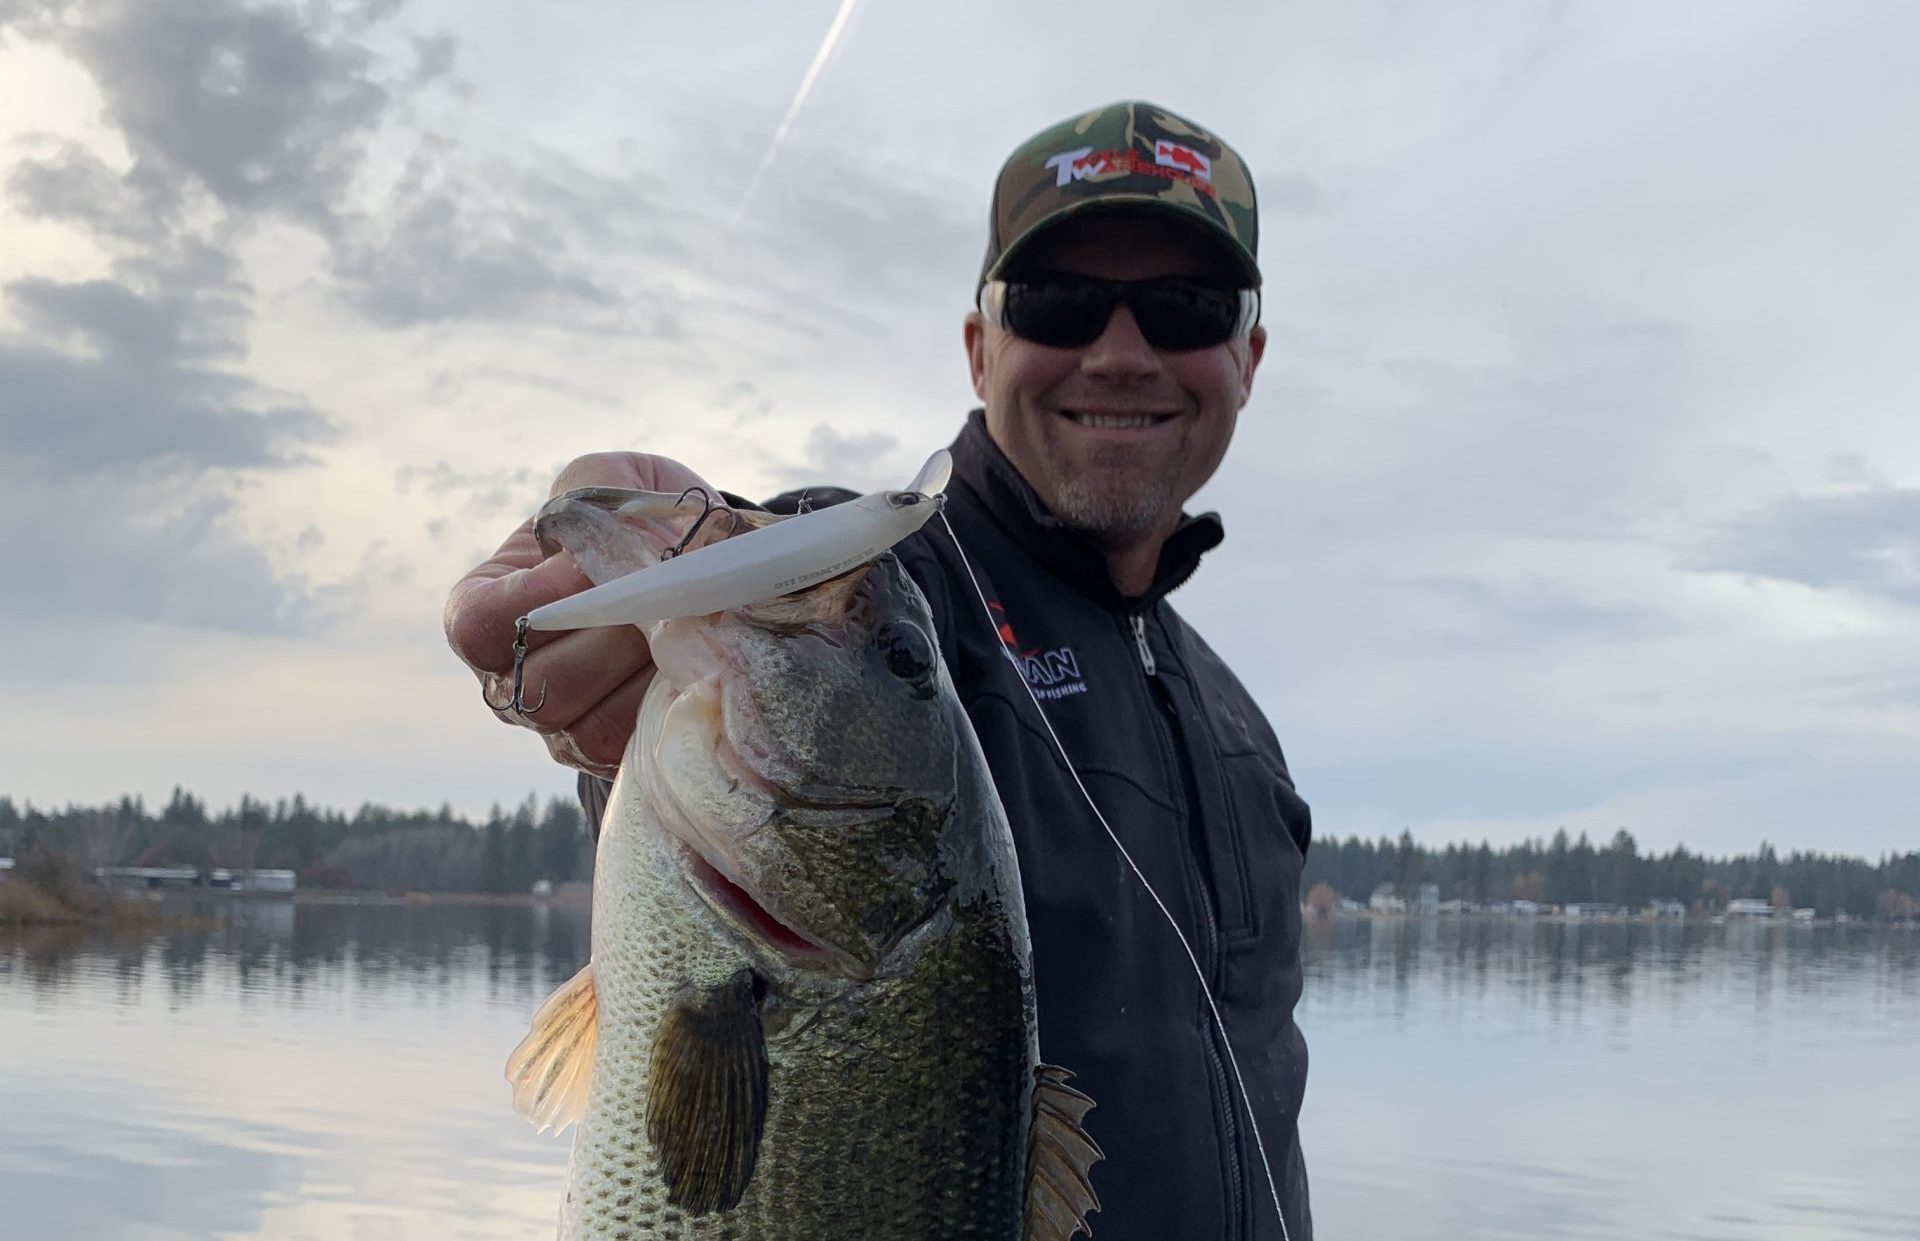 Luke Clausen Adds a Trio of New Sponsors – Anglers Channel